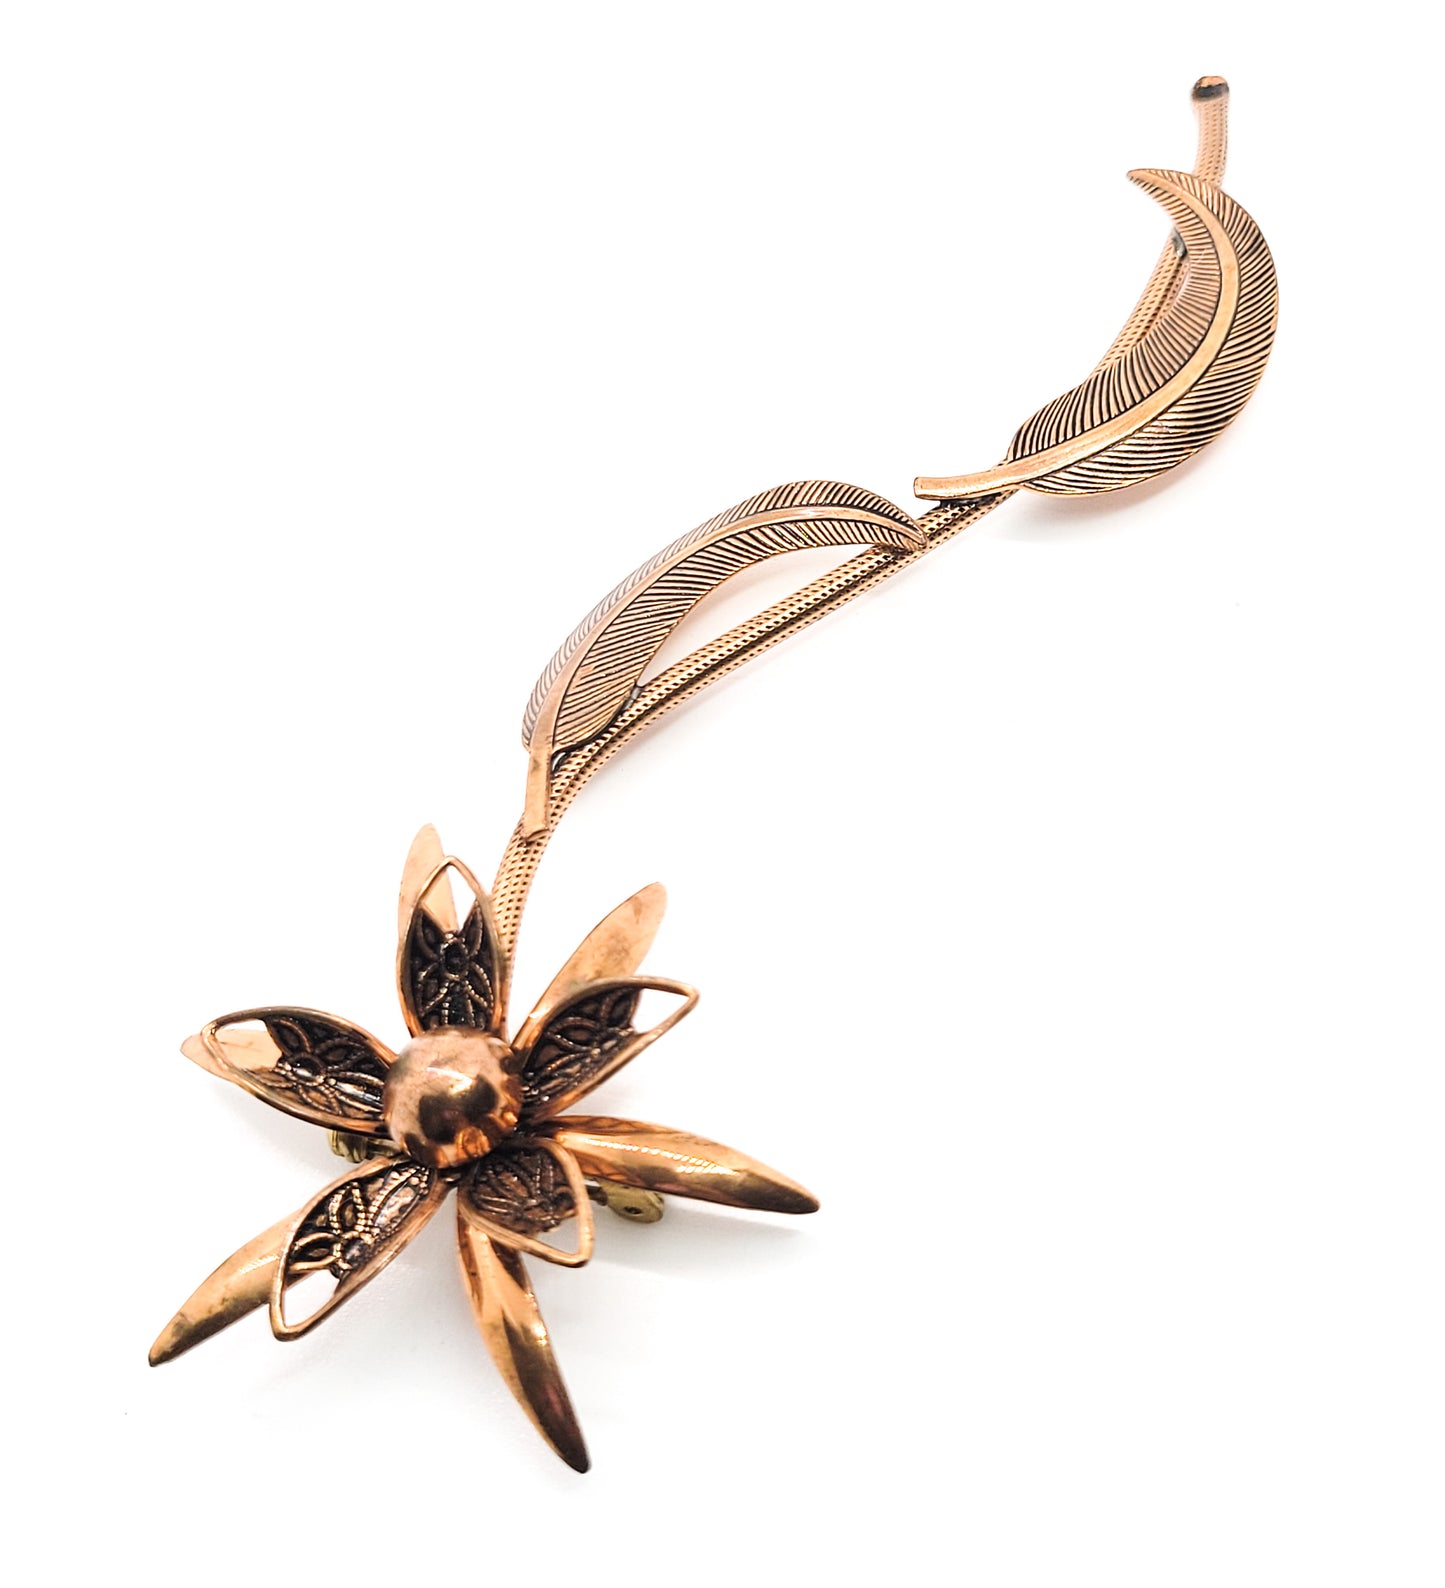 Large copper 3D flower brooch with stem and leaves vintage pin 4.5 inches